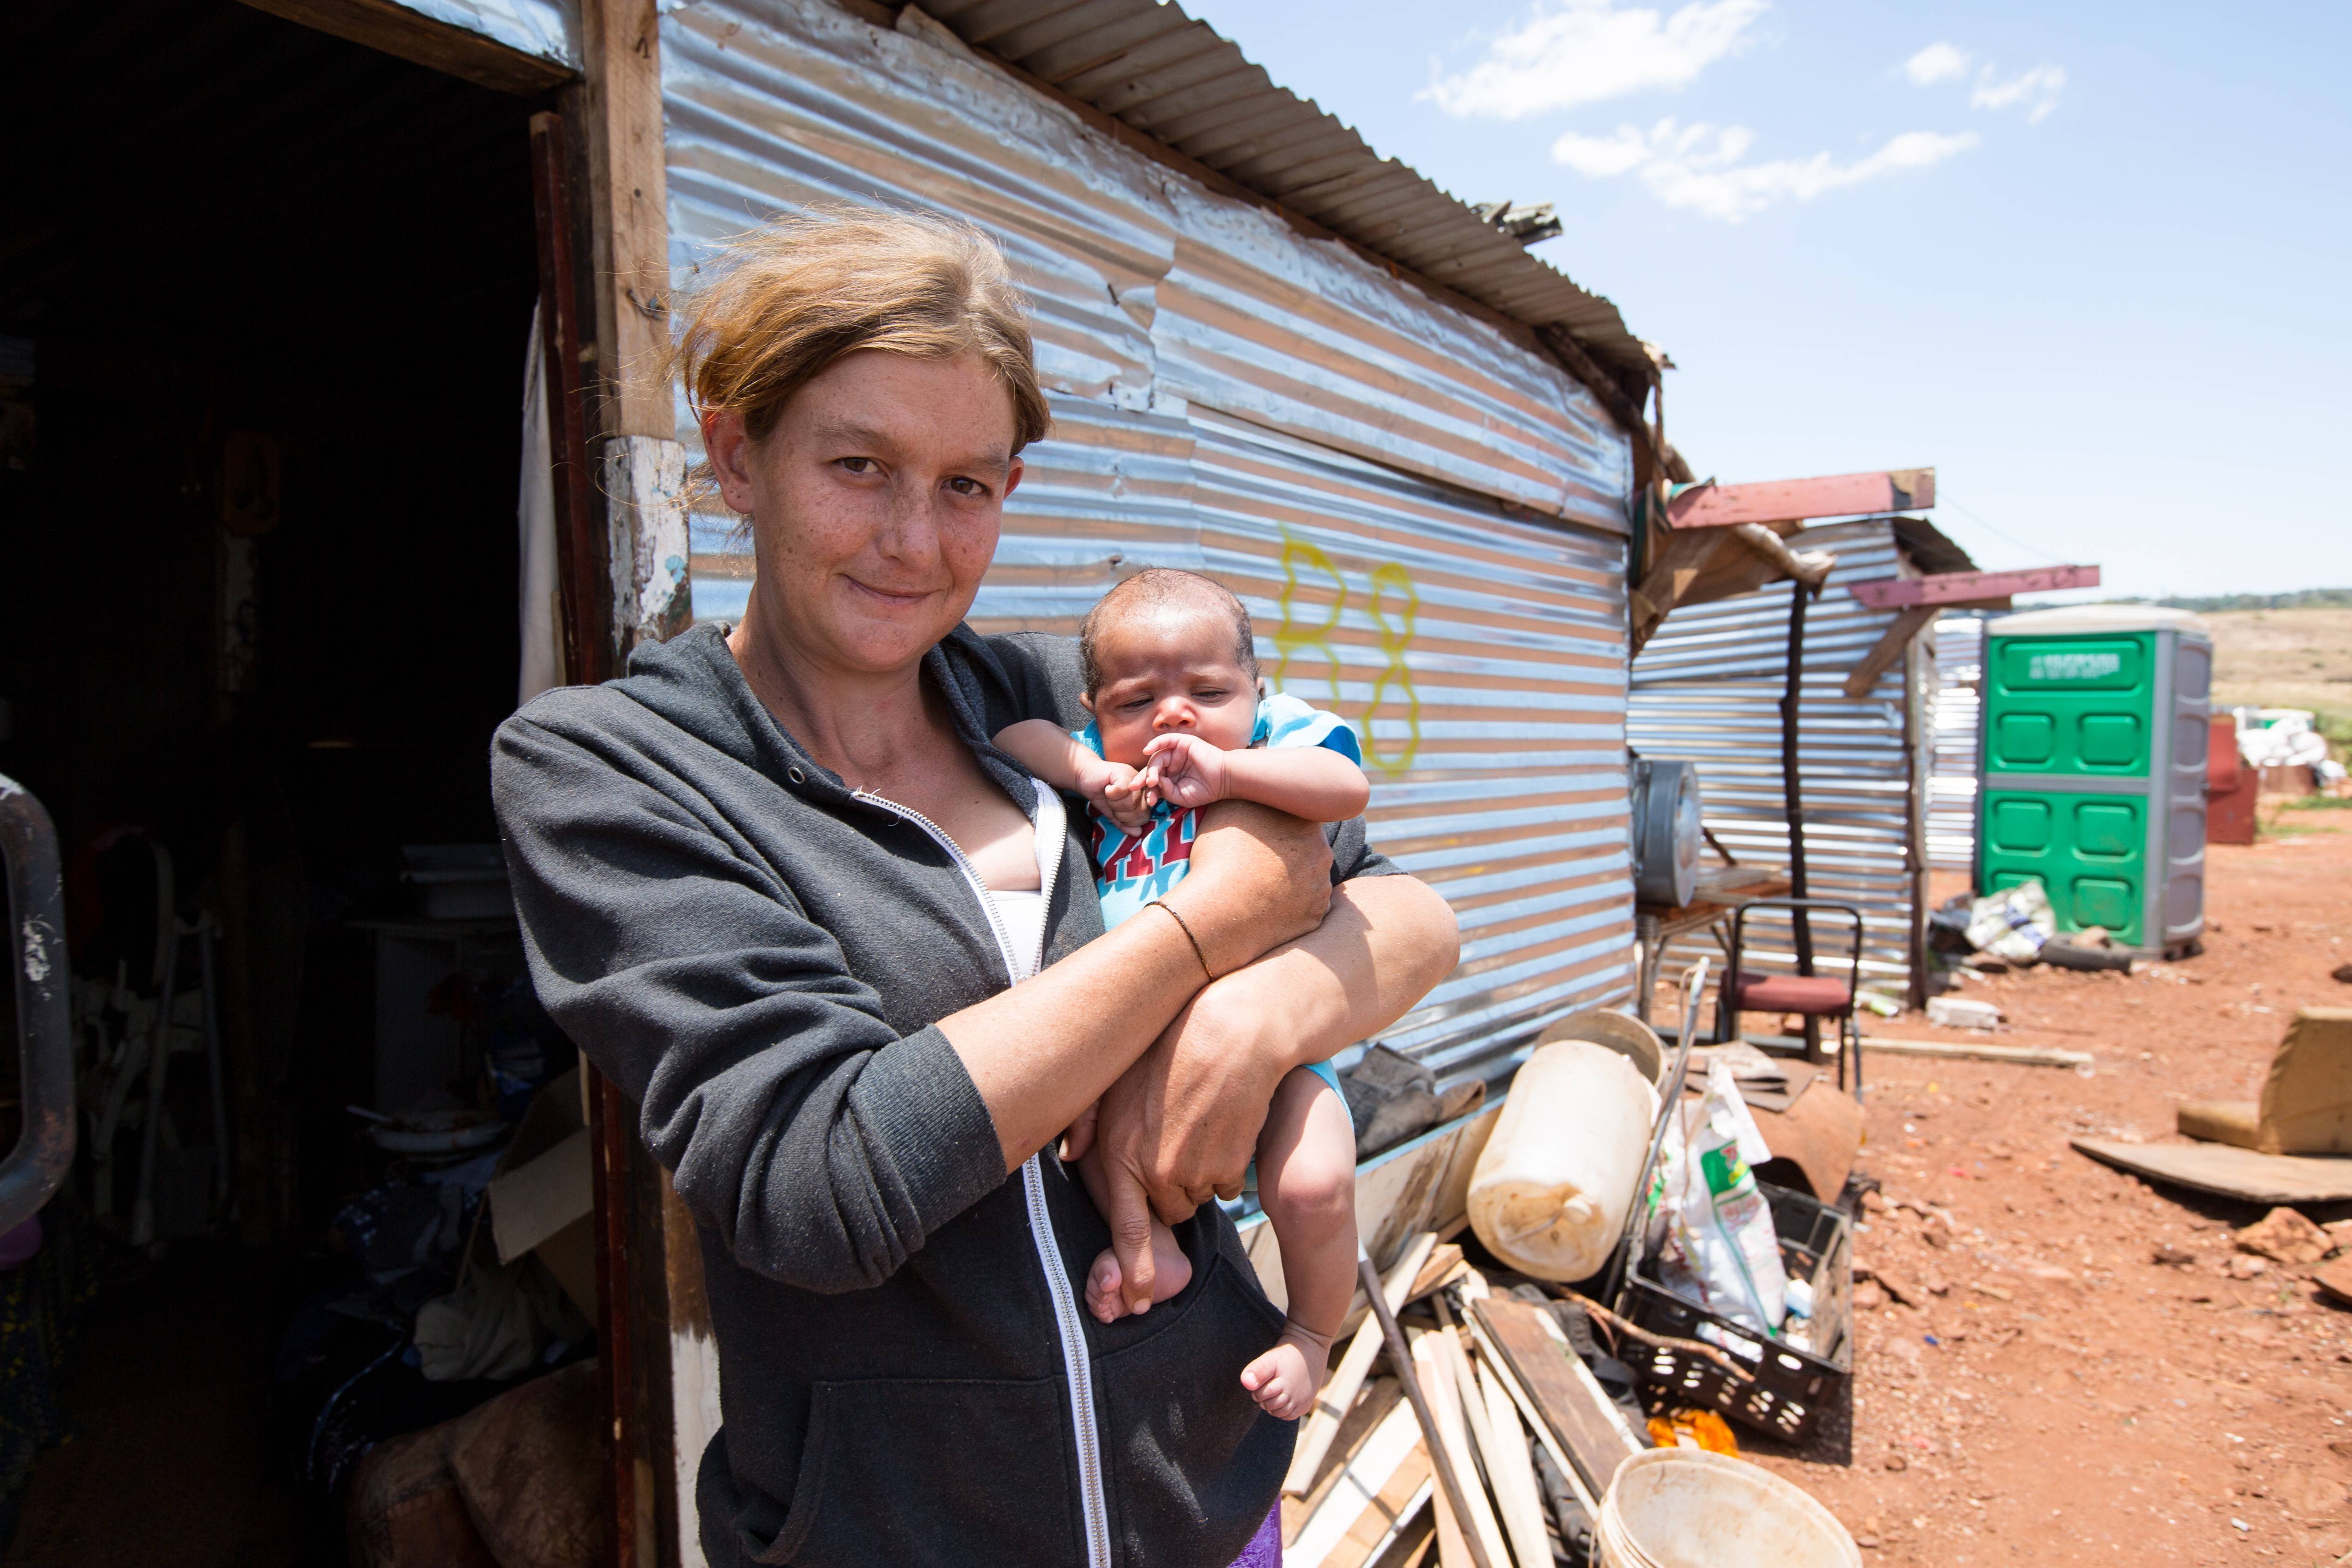 Poor White Mother with Baby in South Africa's Squatter Camp